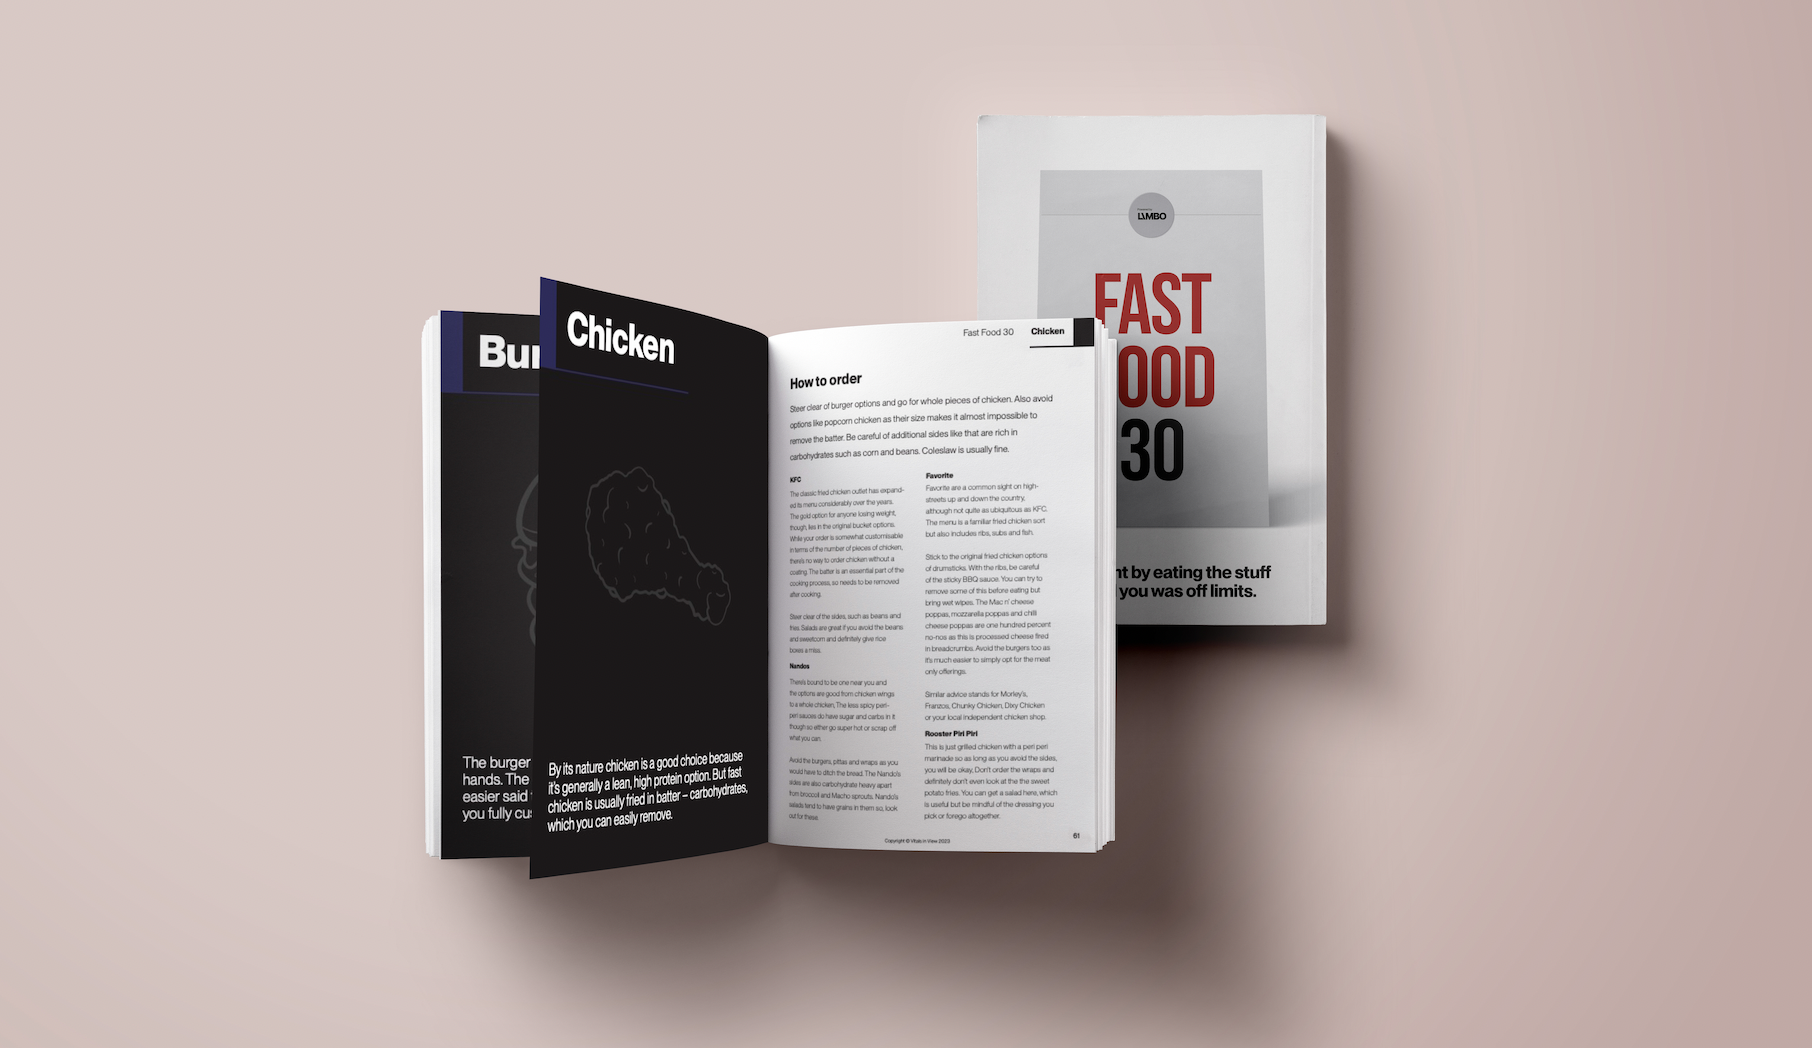 Fast Food 30 - the story behind the book